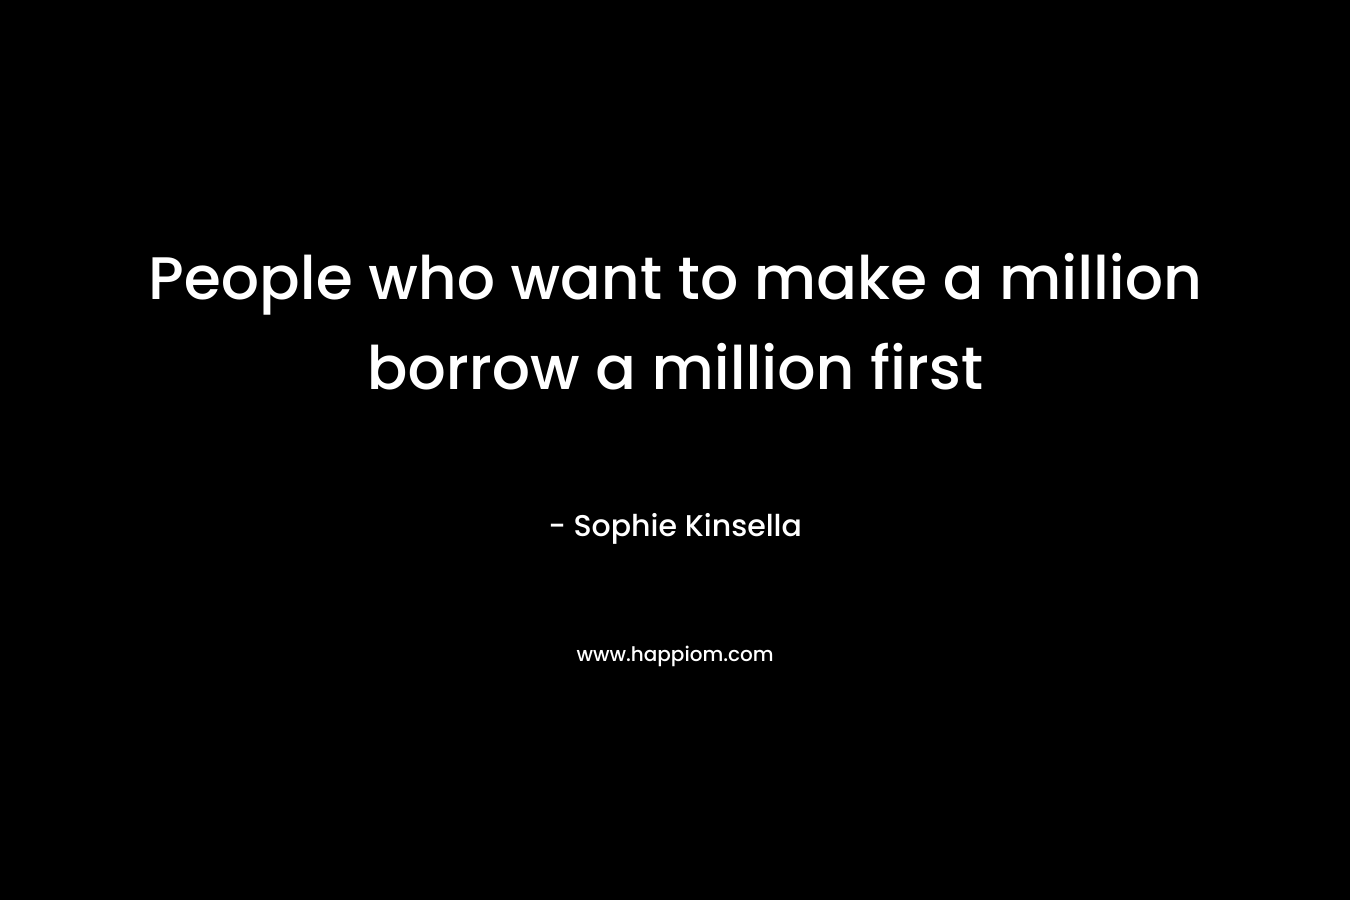 People who want to make a million borrow a million first